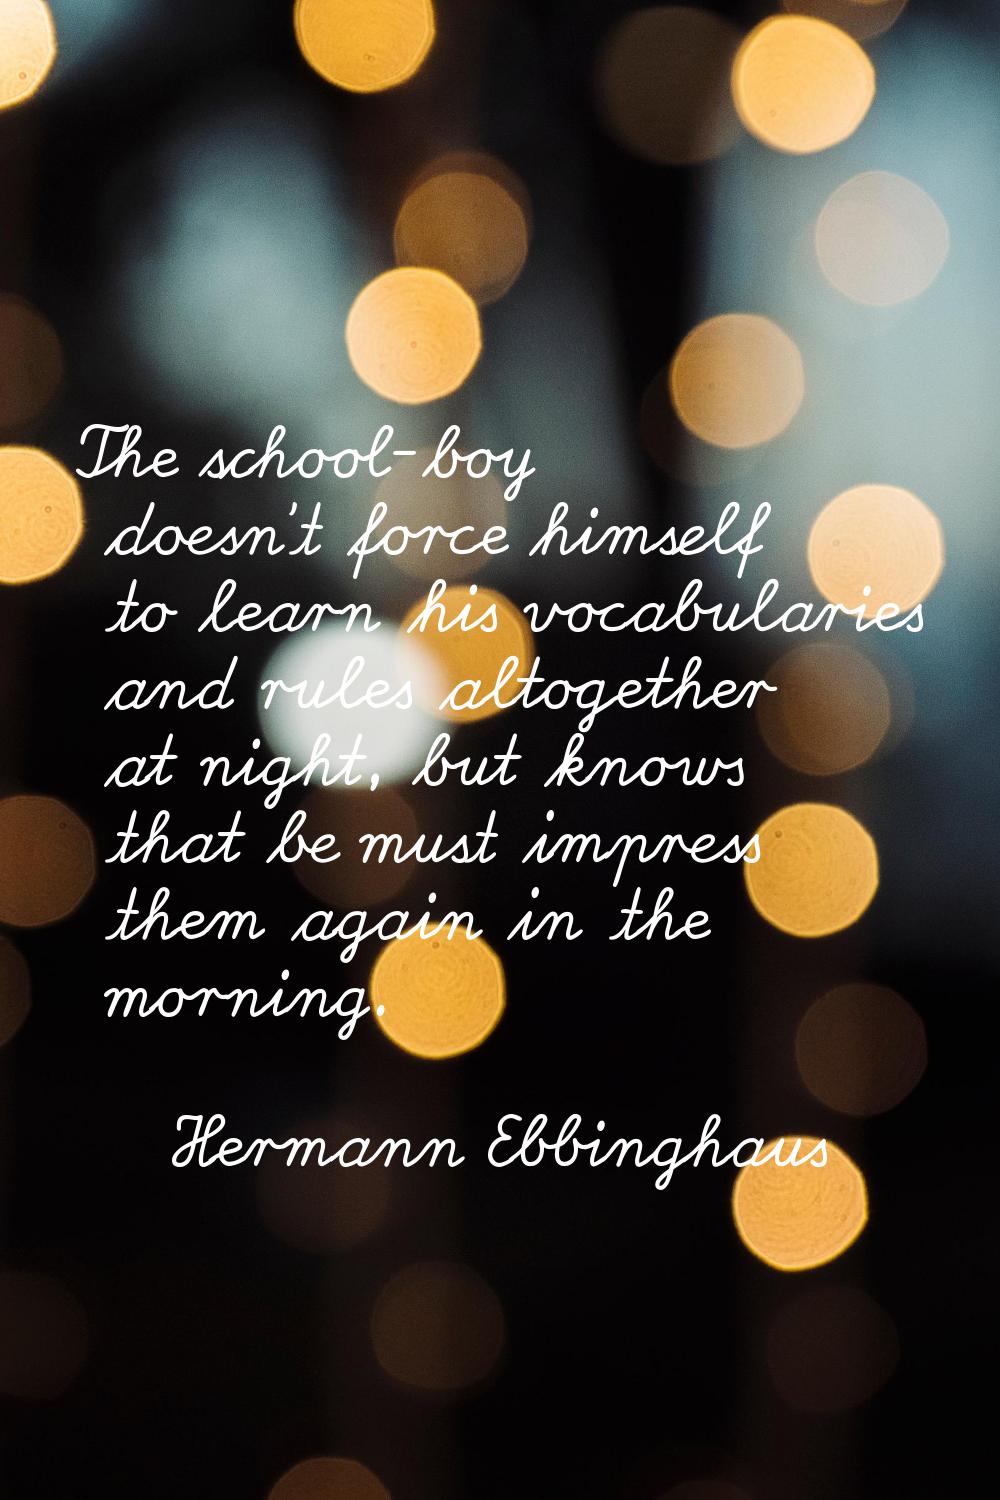 The school-boy doesn't force himself to learn his vocabularies and rules altogether at night, but k